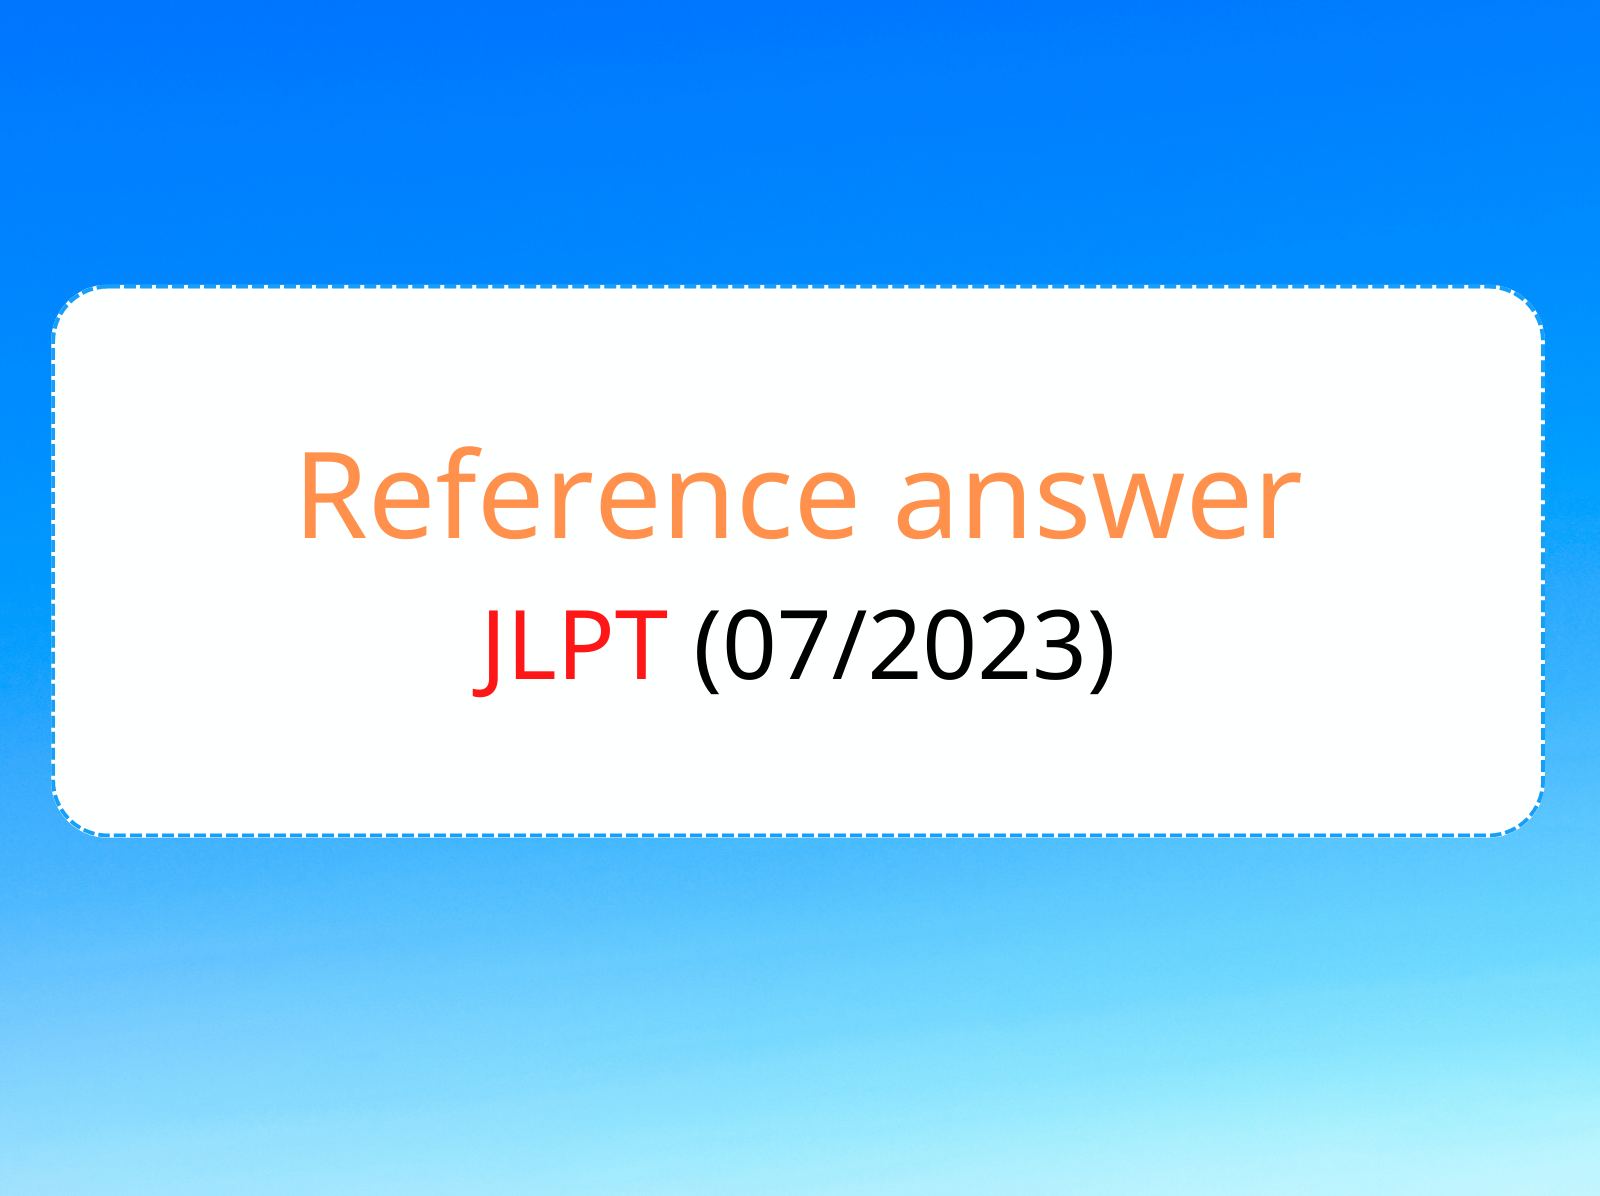 Reference answer JLPT (07/2023)